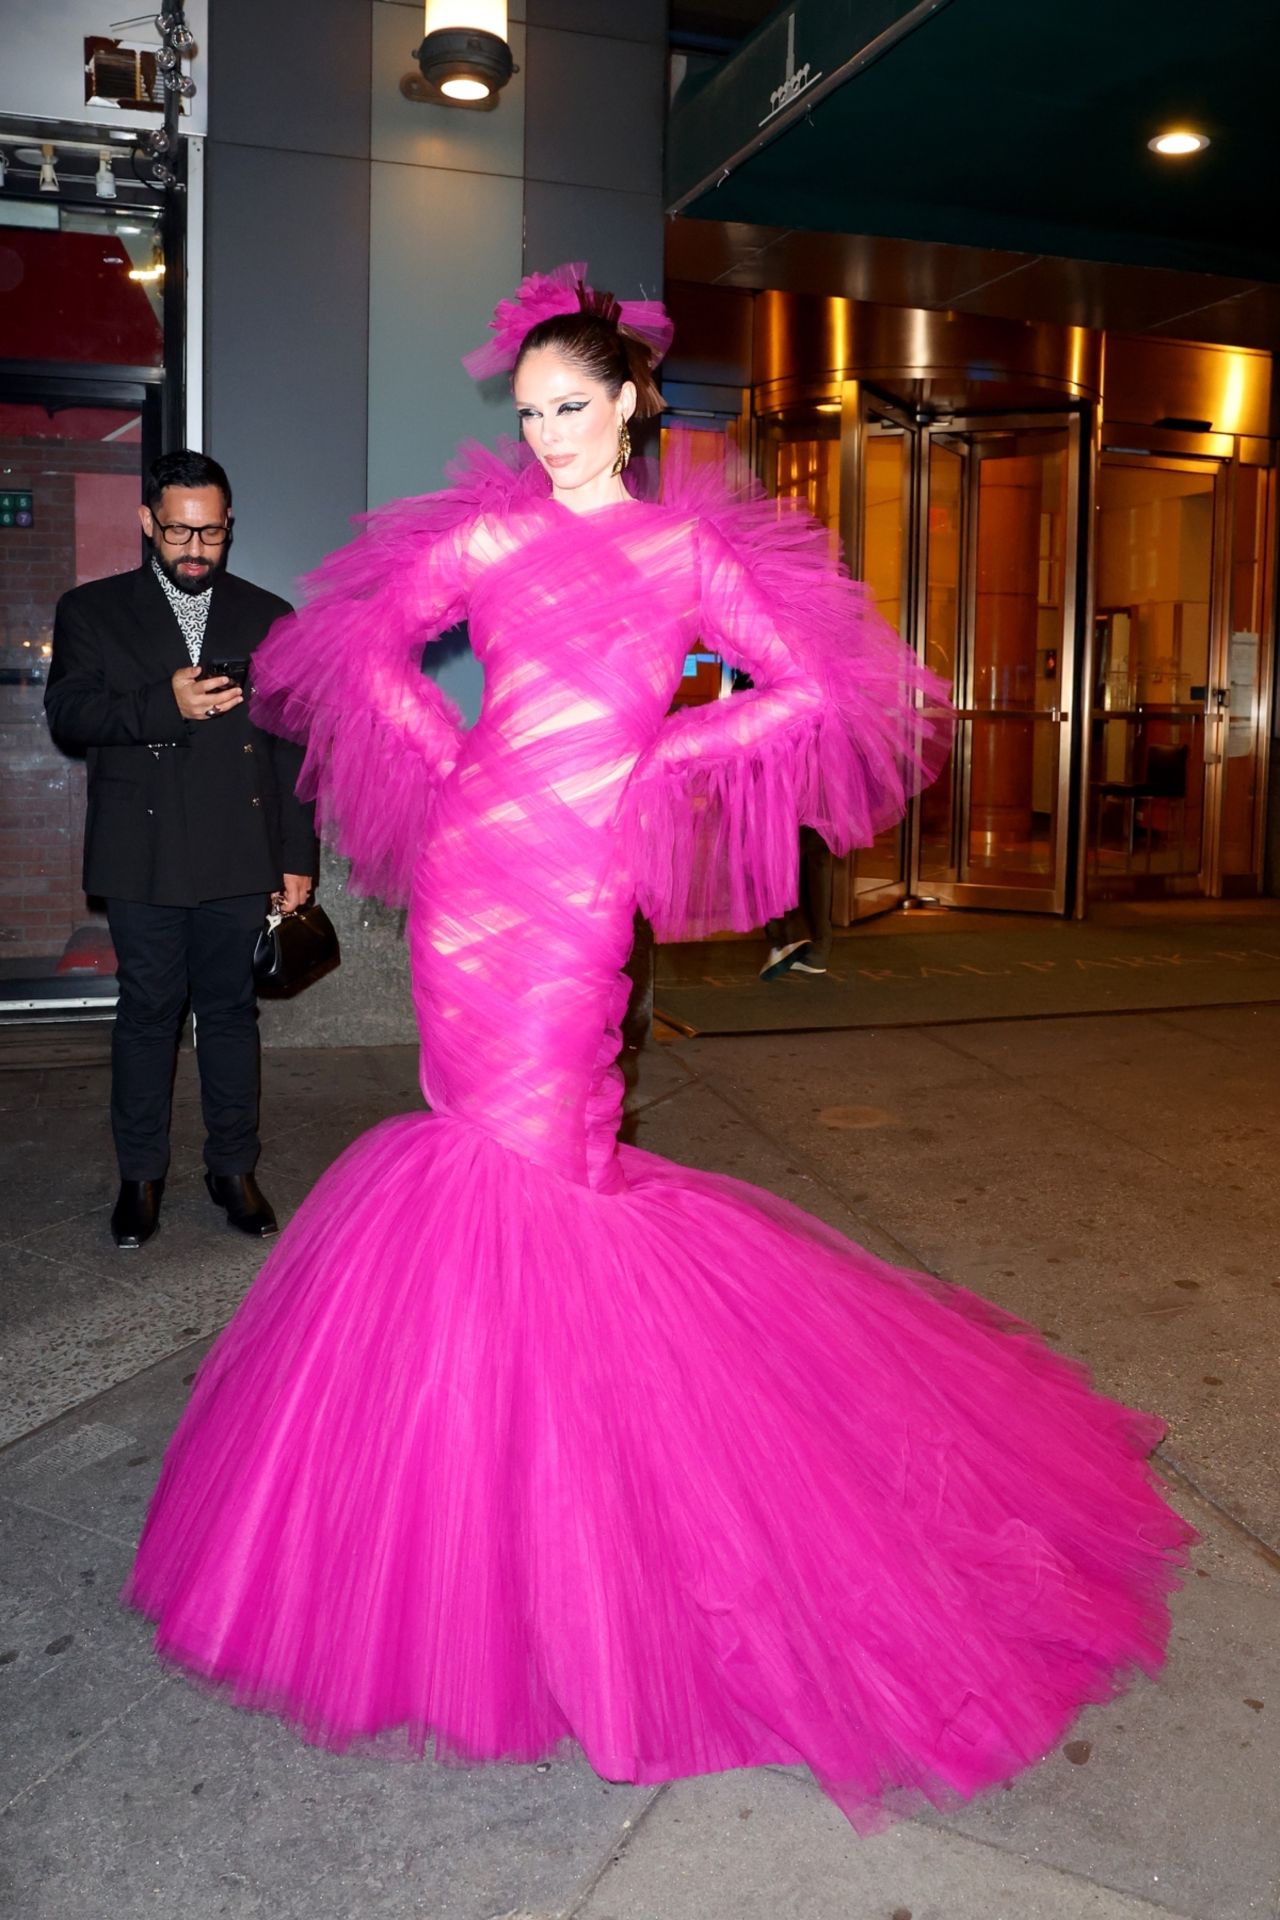 COCO ROCHA AT THE THE MULBERRY BAR FOR A MET GALA AFTER PARTY IN NEW YORK5